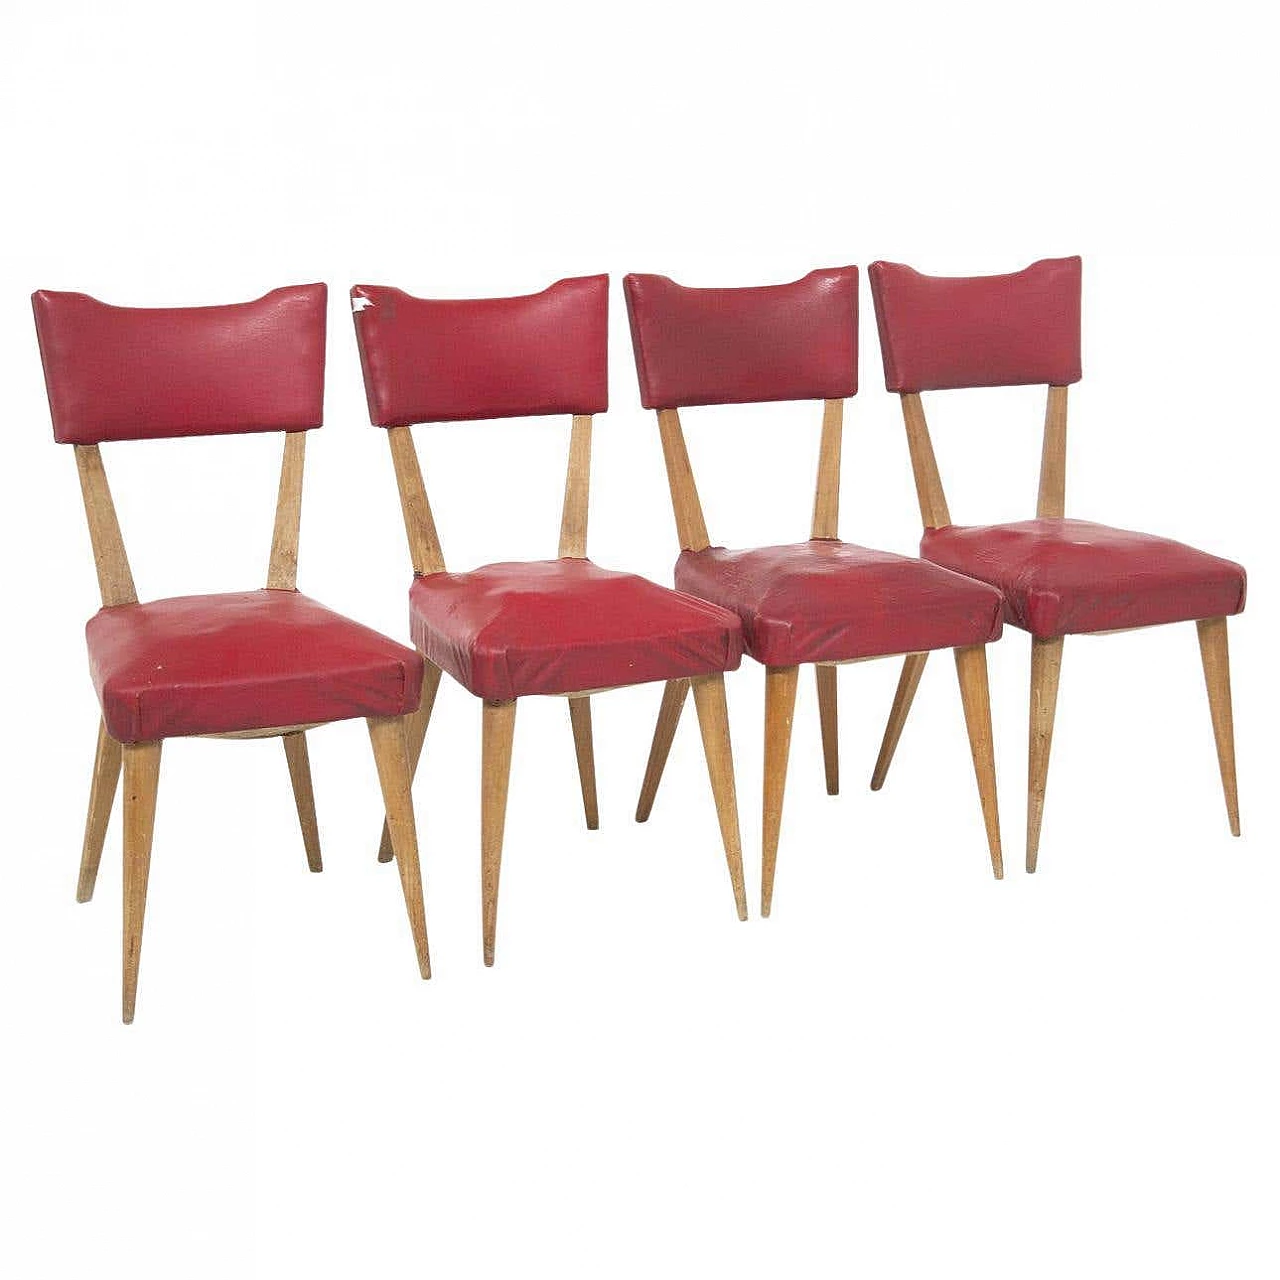 4 Wooden chairs upholstered in red skai, 1950s 4